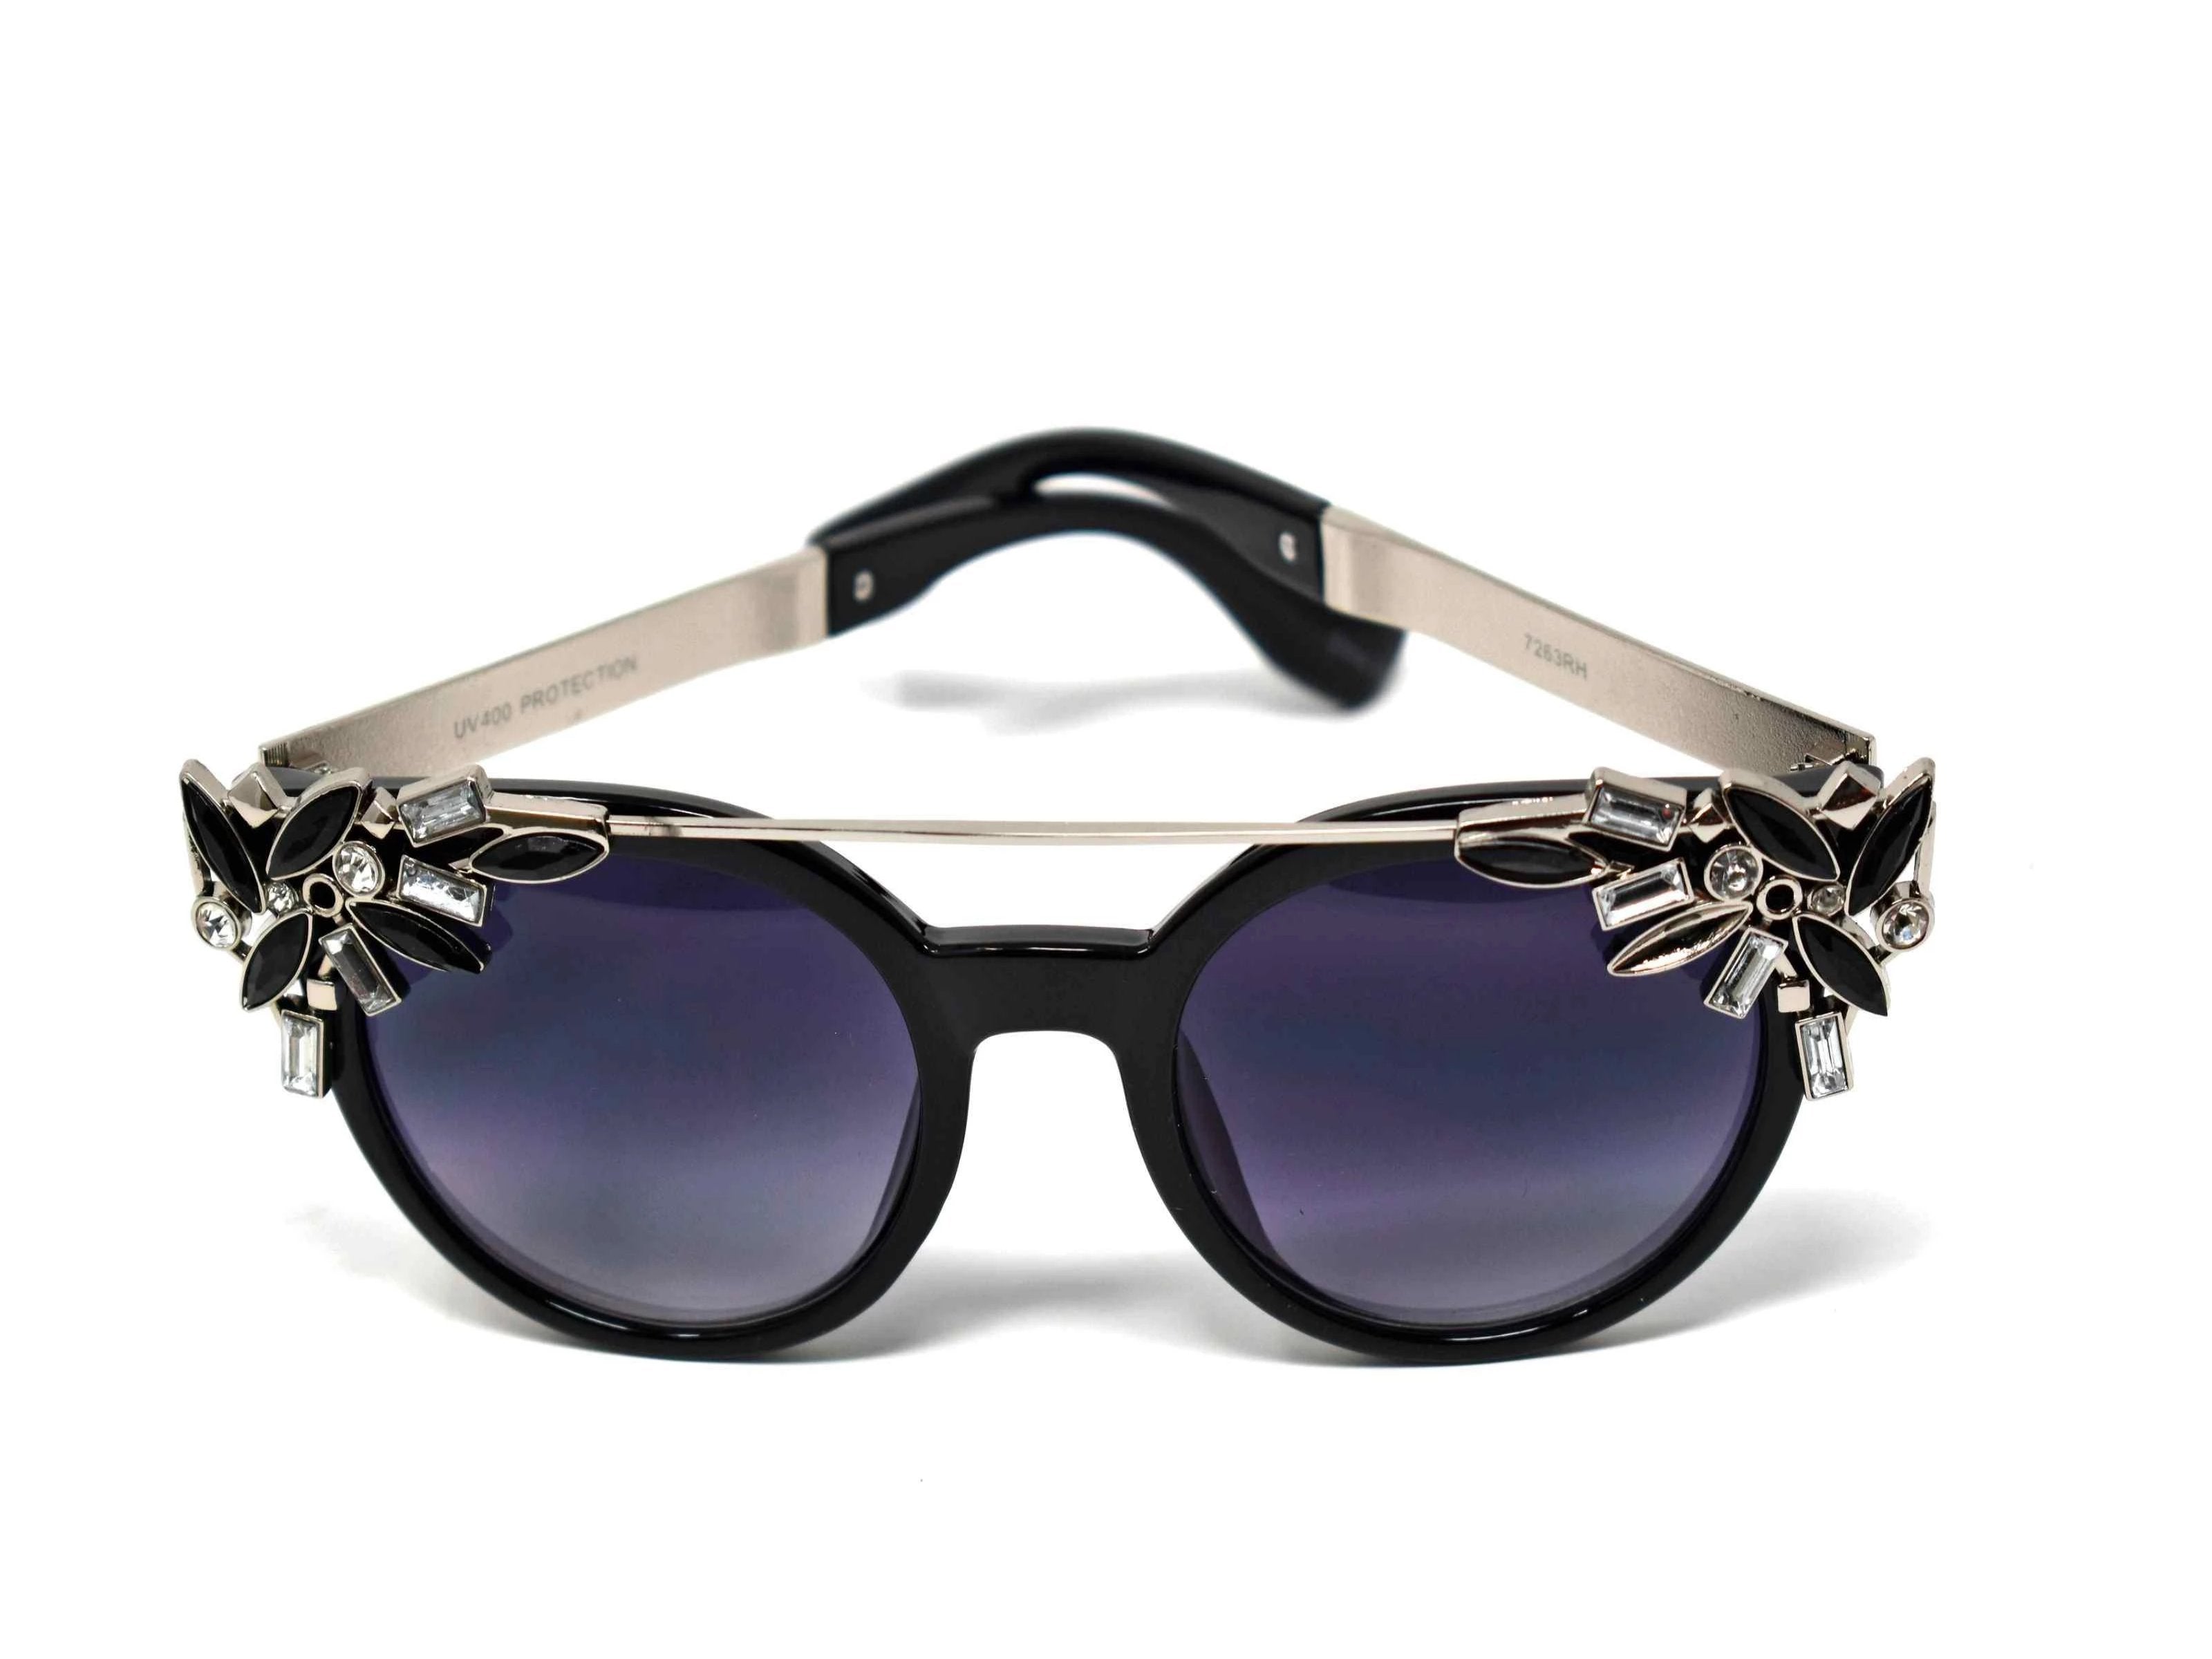 Trend setter and attention getter is what they will call you in these Pansy black sunglasses with a sleek silver trim adorned in black and clear gems, in a pantos style frame.